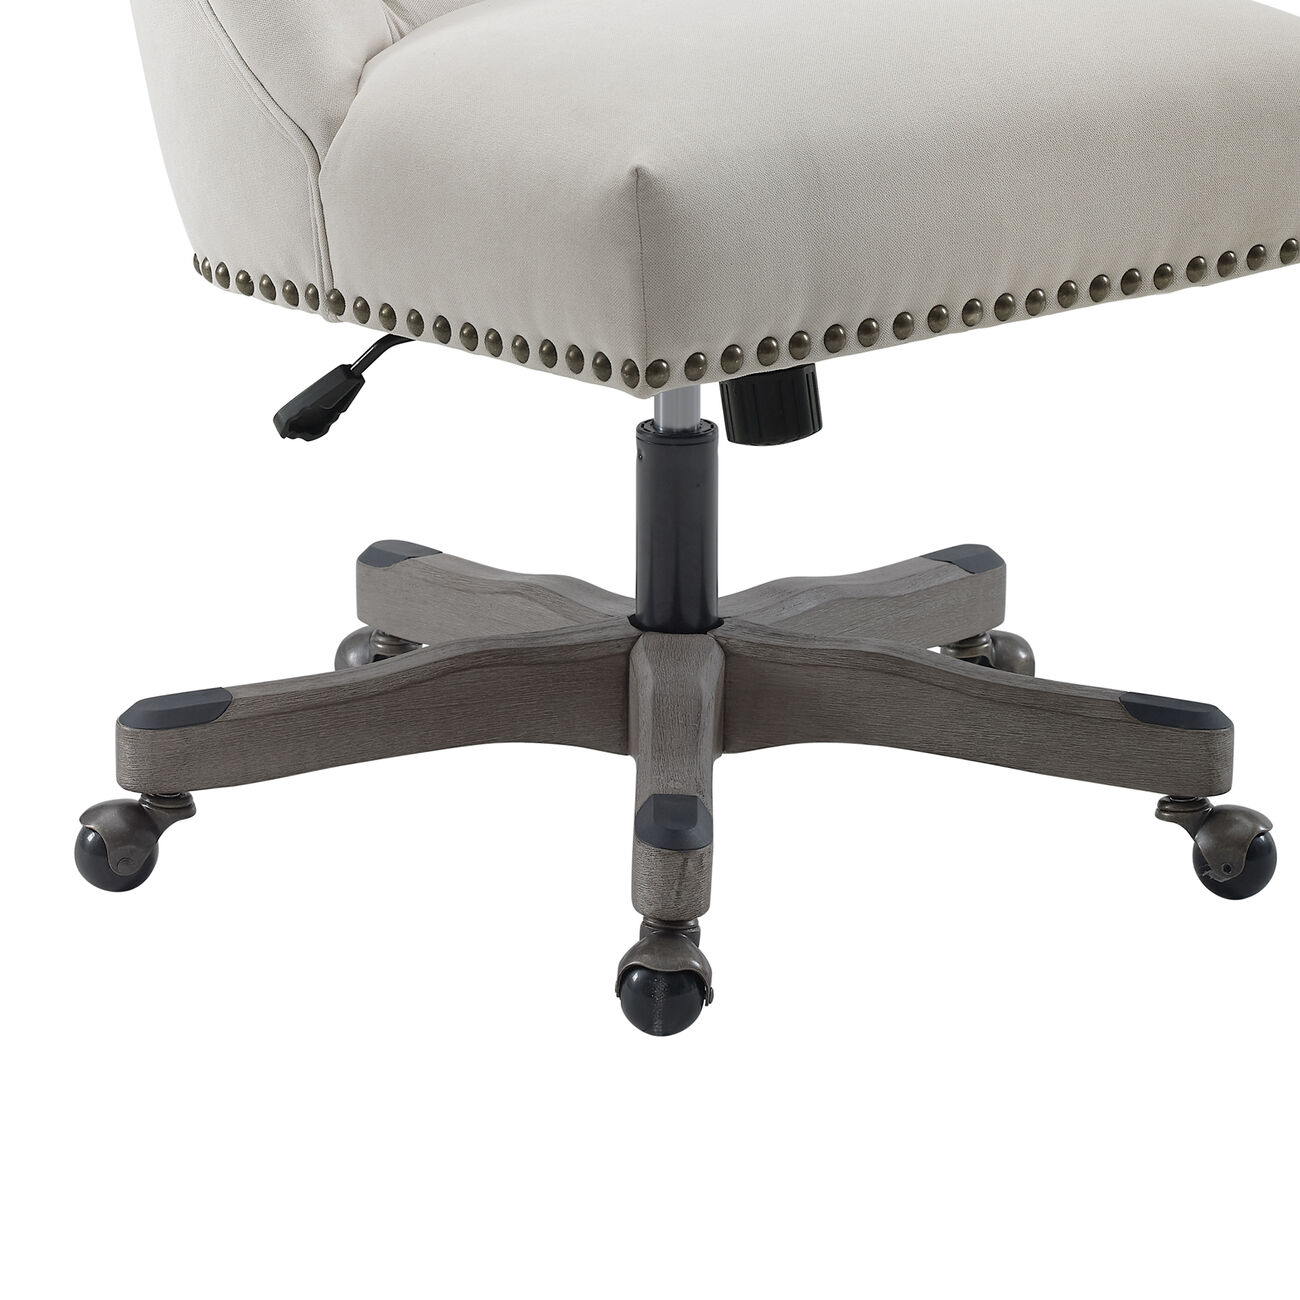 Button Tufted Fabric Upholstered Swivel Office Chair with Casters, White